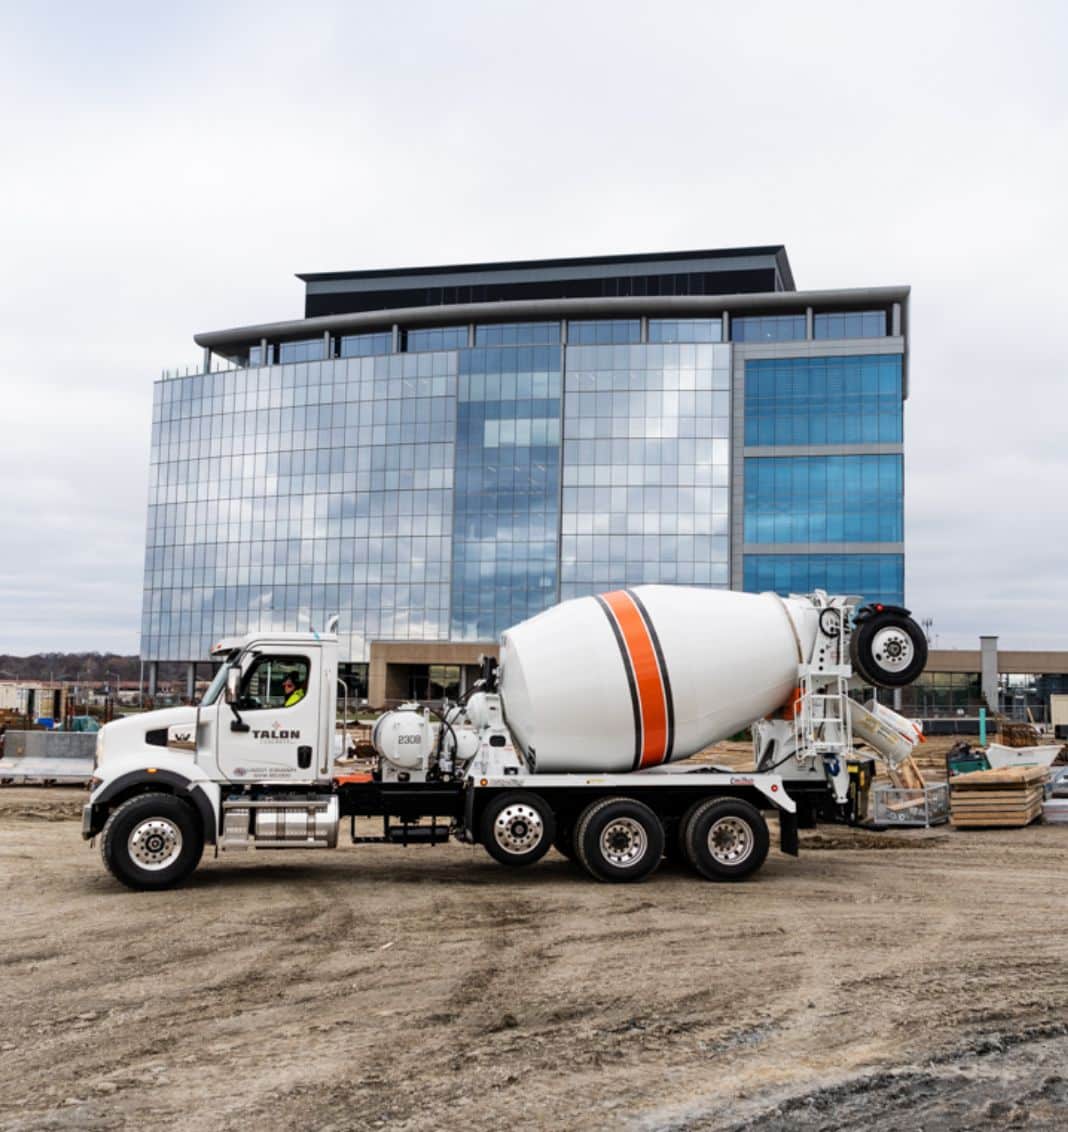 Cement truck in front of building